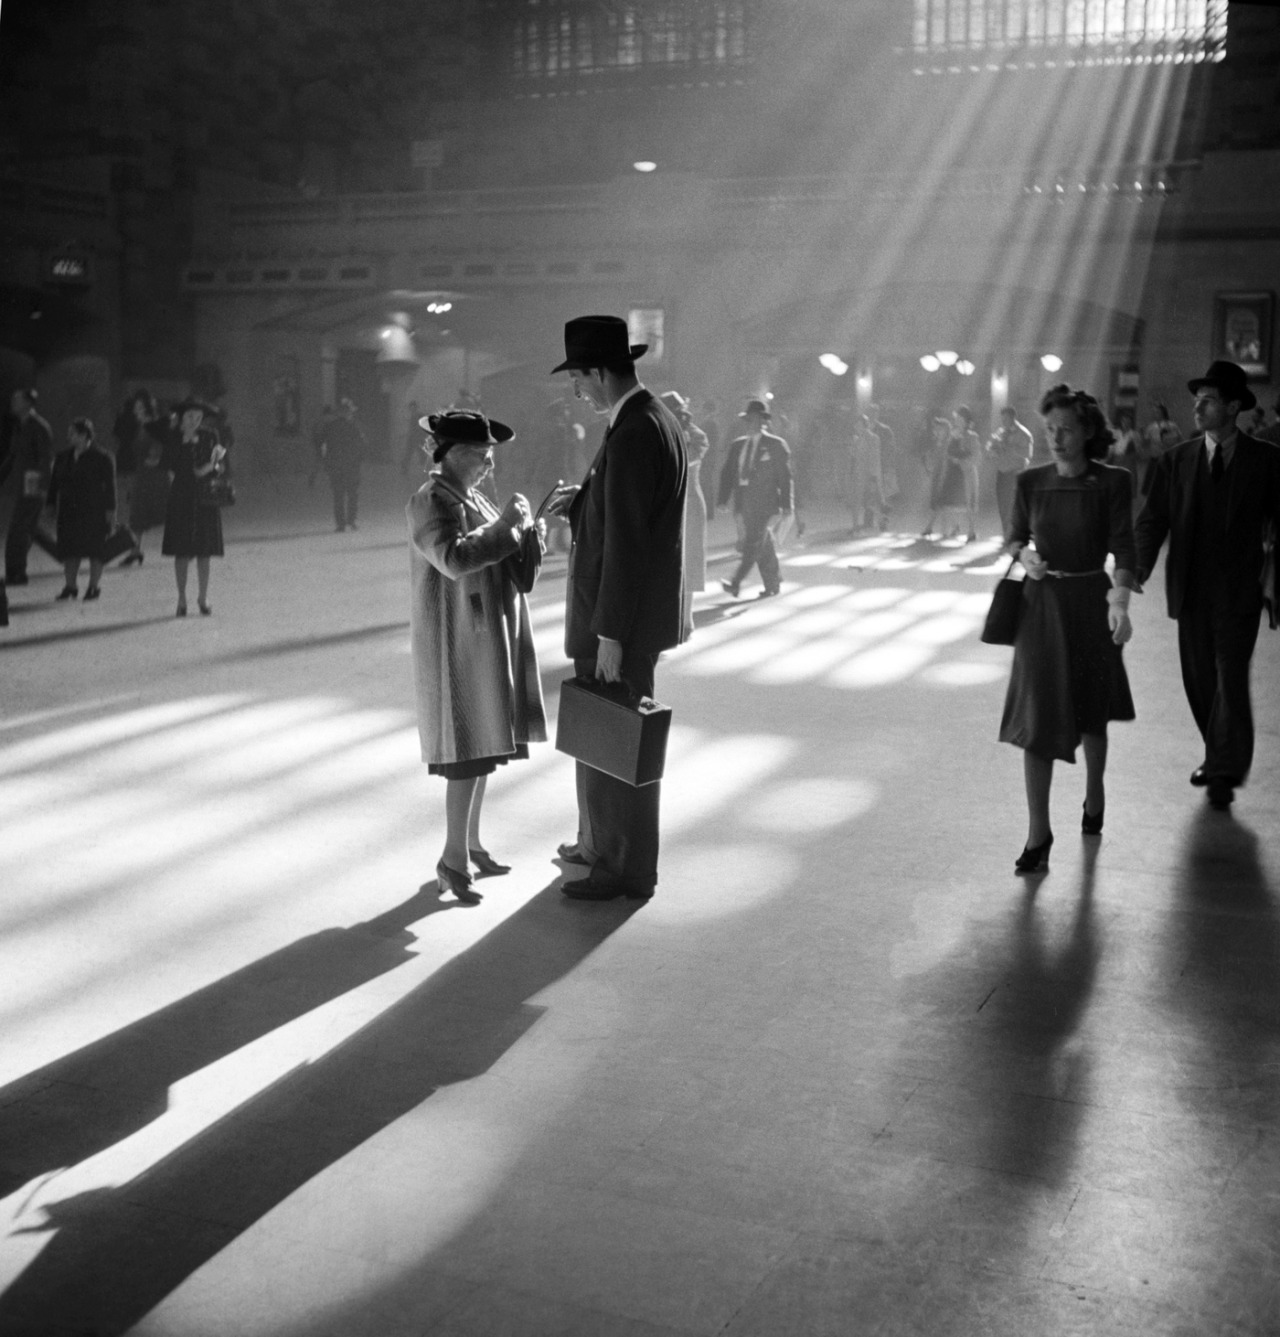 Grand Central Terminal, New York City, New York, USA, John Collier for Office of War Information, October 1941. From Universal History Archive/Universal Images Group via Getty Images.